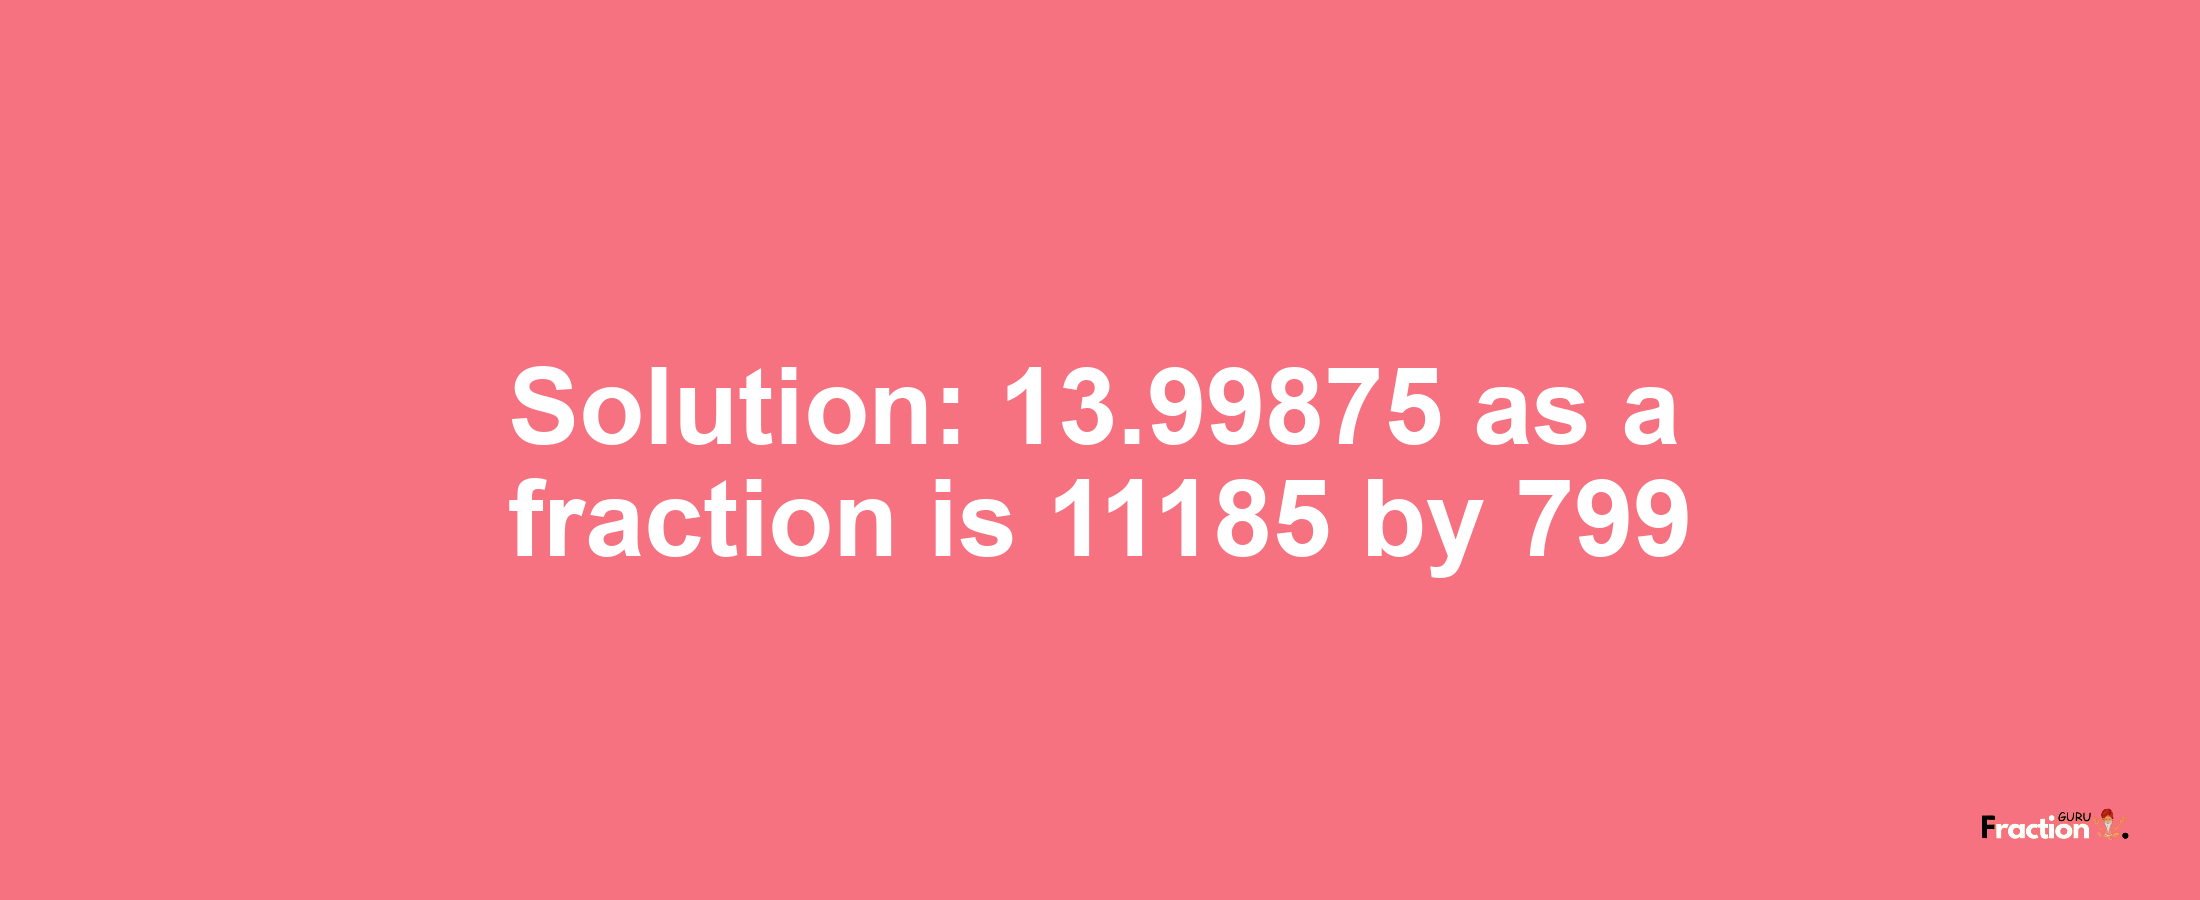 Solution:13.99875 as a fraction is 11185/799